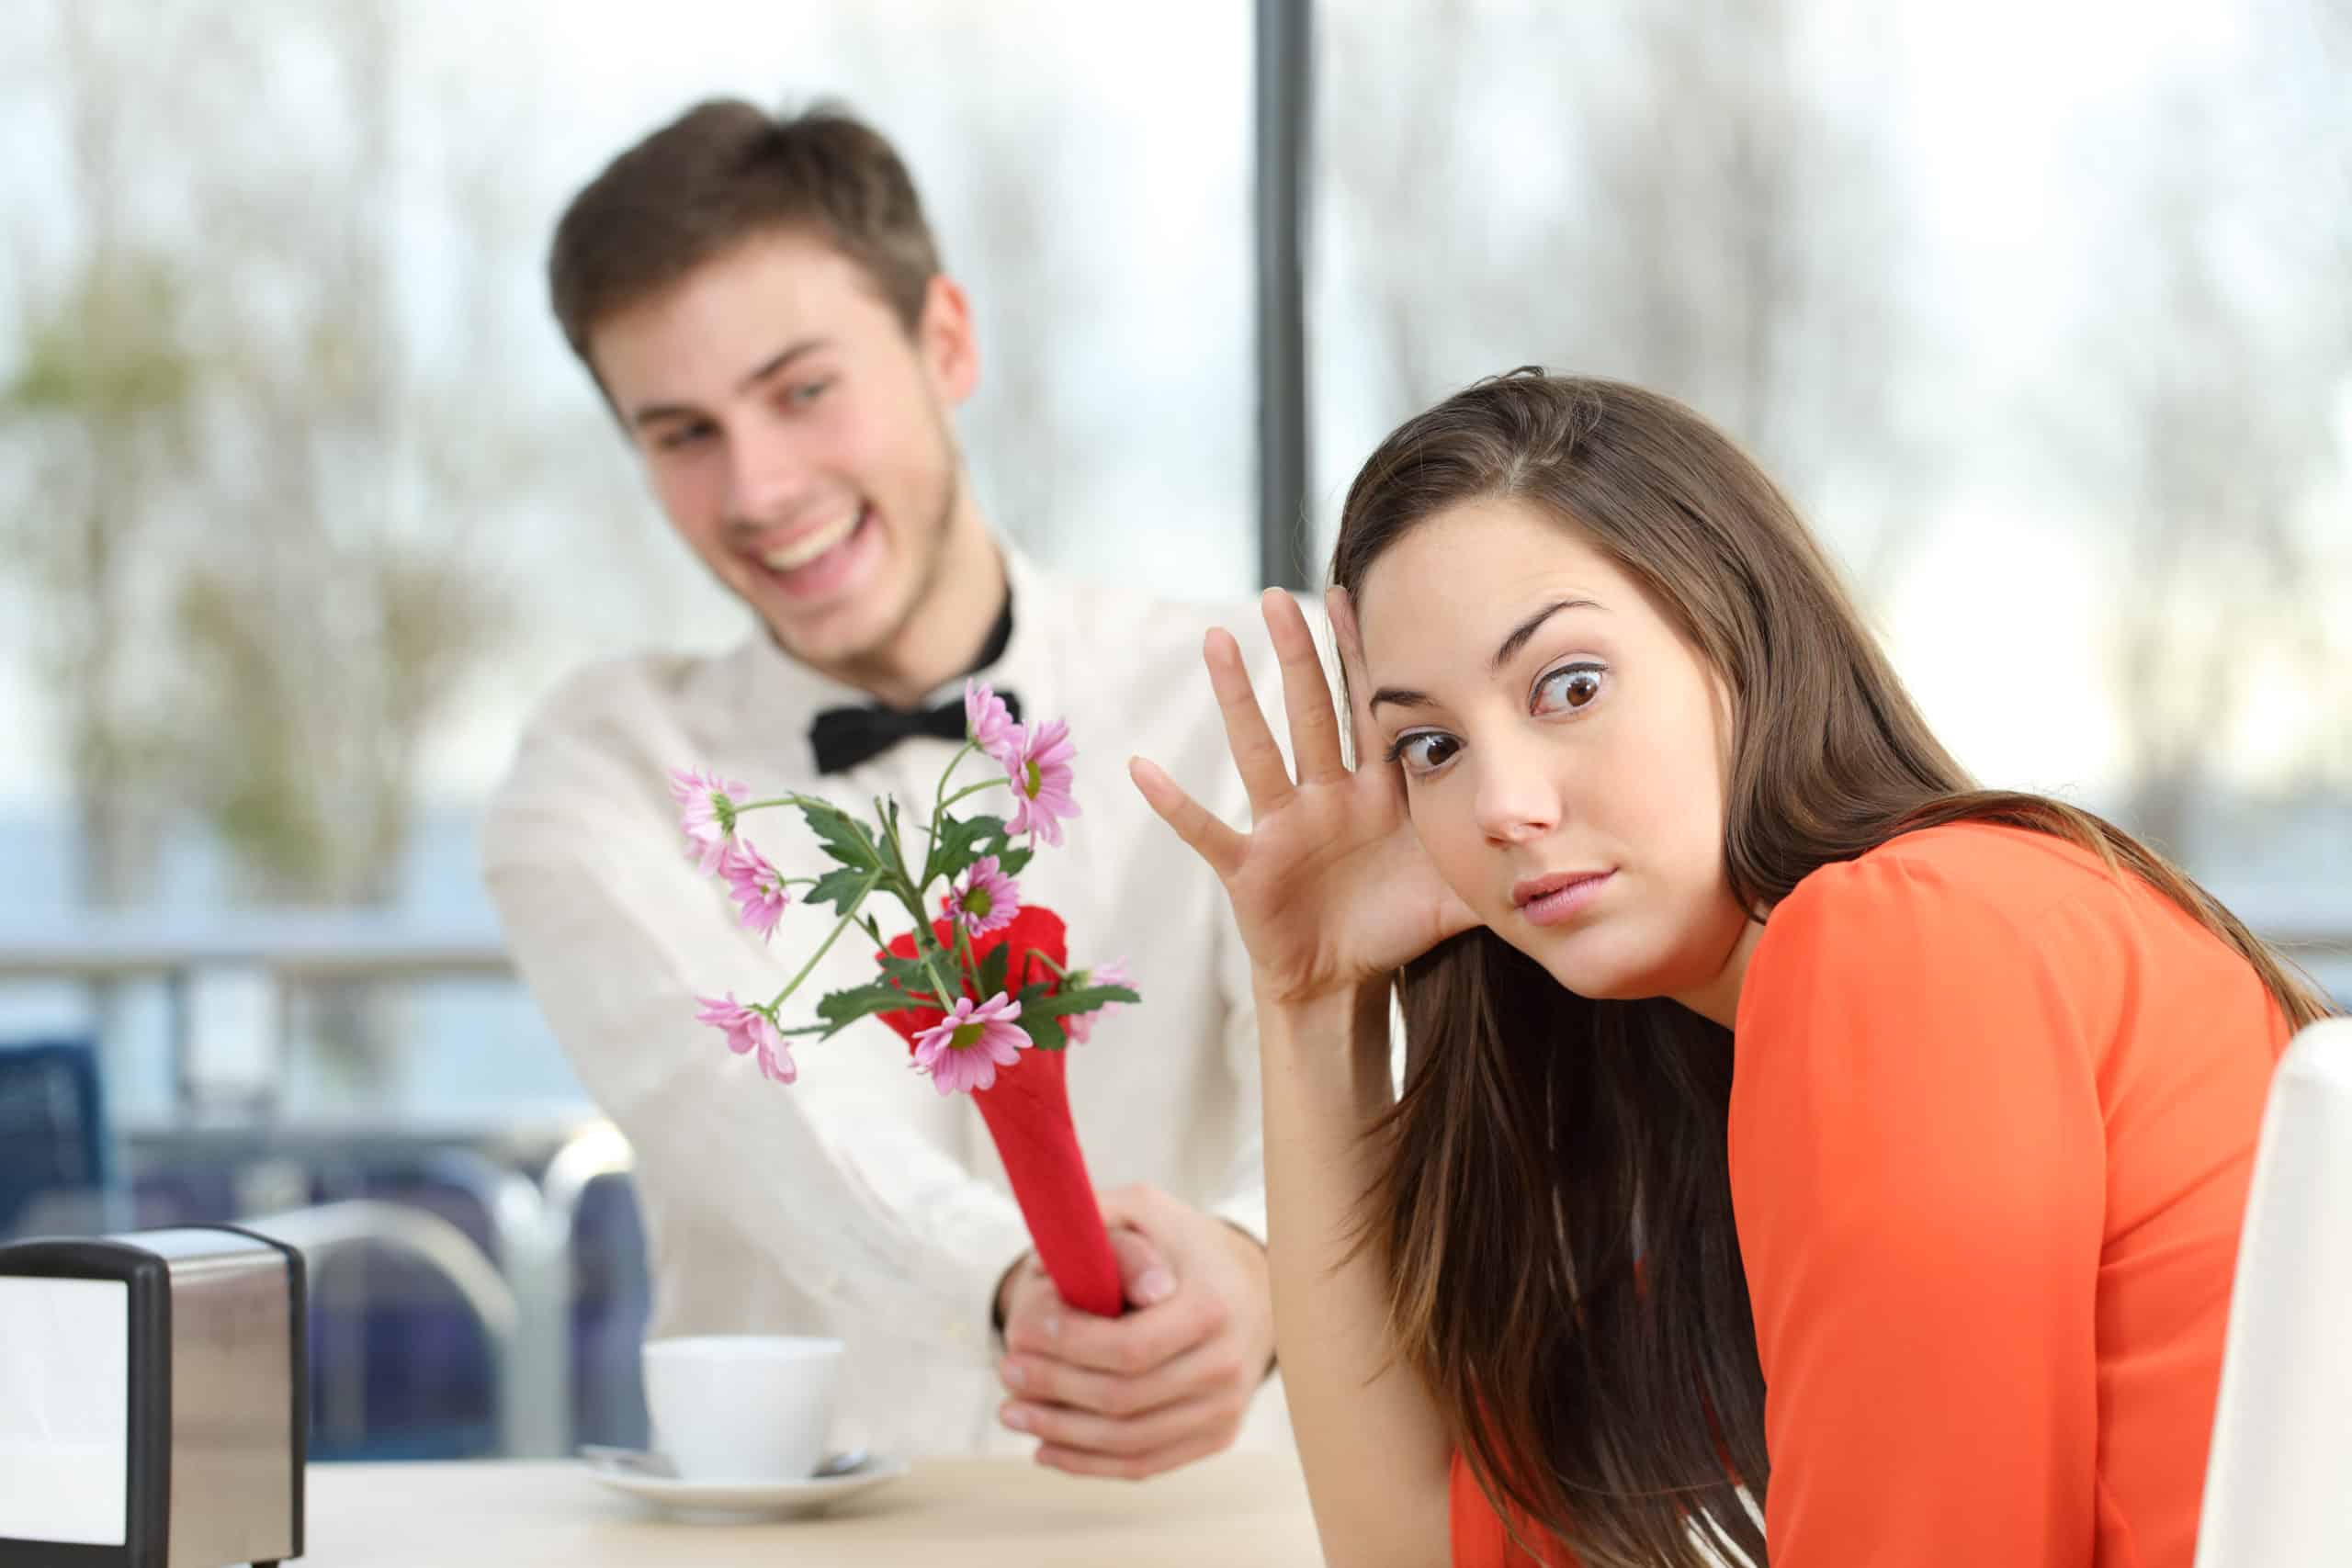 Disgusted Woman Rejecting A Geek Boy Offering Flowers In A